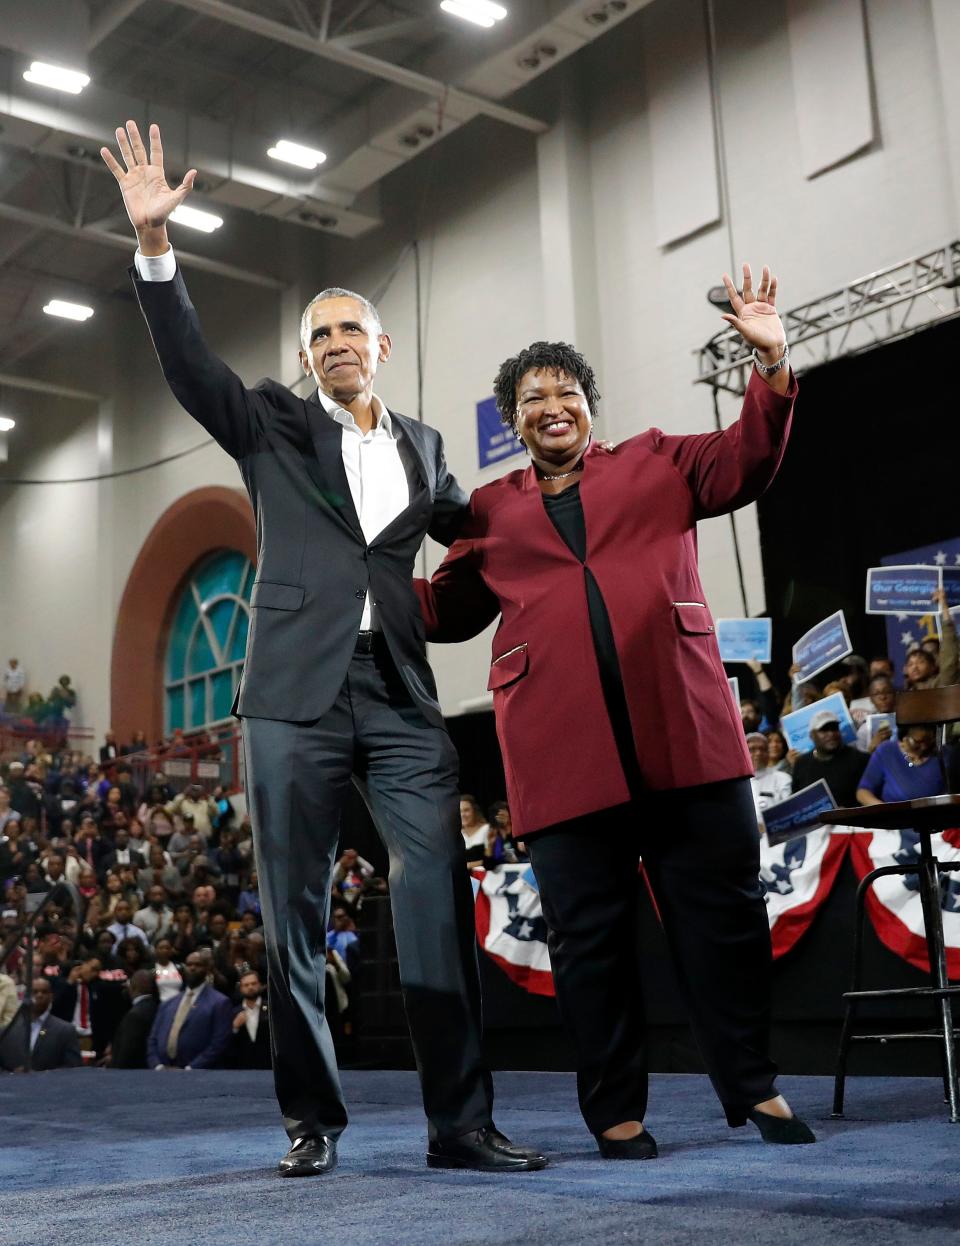 Former President Barack Obama and Democratic candidate for Georgia Governor Stacey Abrams wave to the crowd during a campaign rally at Morehouse College on Nov. 2, 2018, in Atlanta.